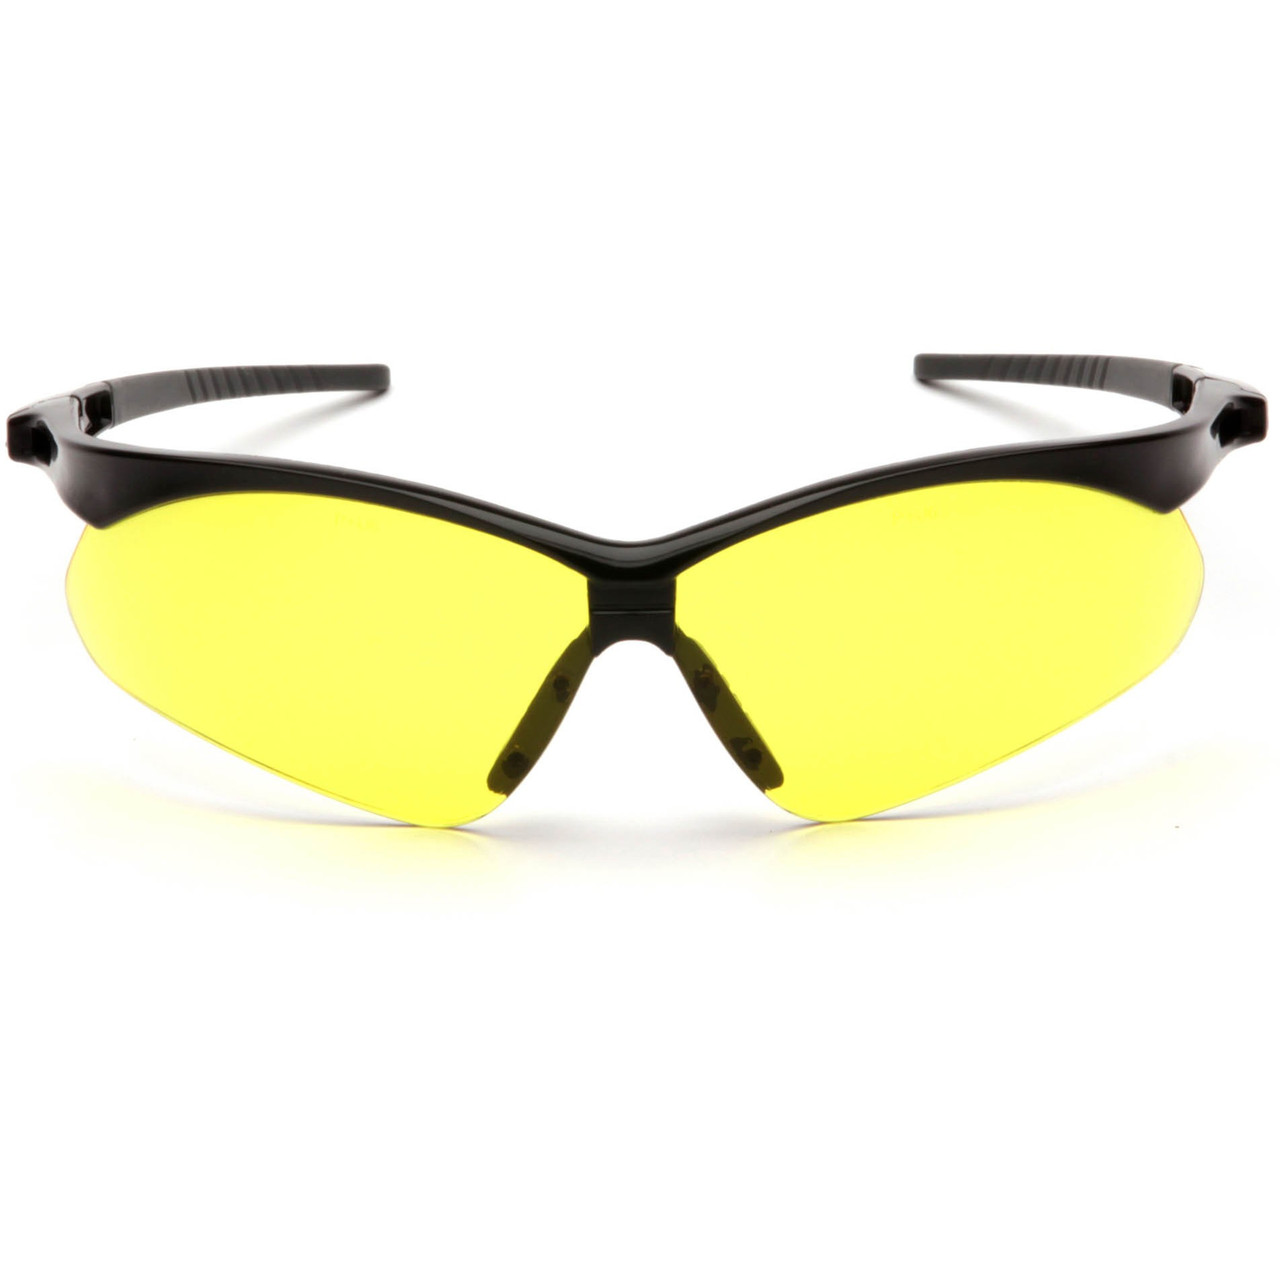 Pyramex SB6310SP PMXtreme Safety Glasses with Black Frame and Amber Lens W/Rubber Nose Temple